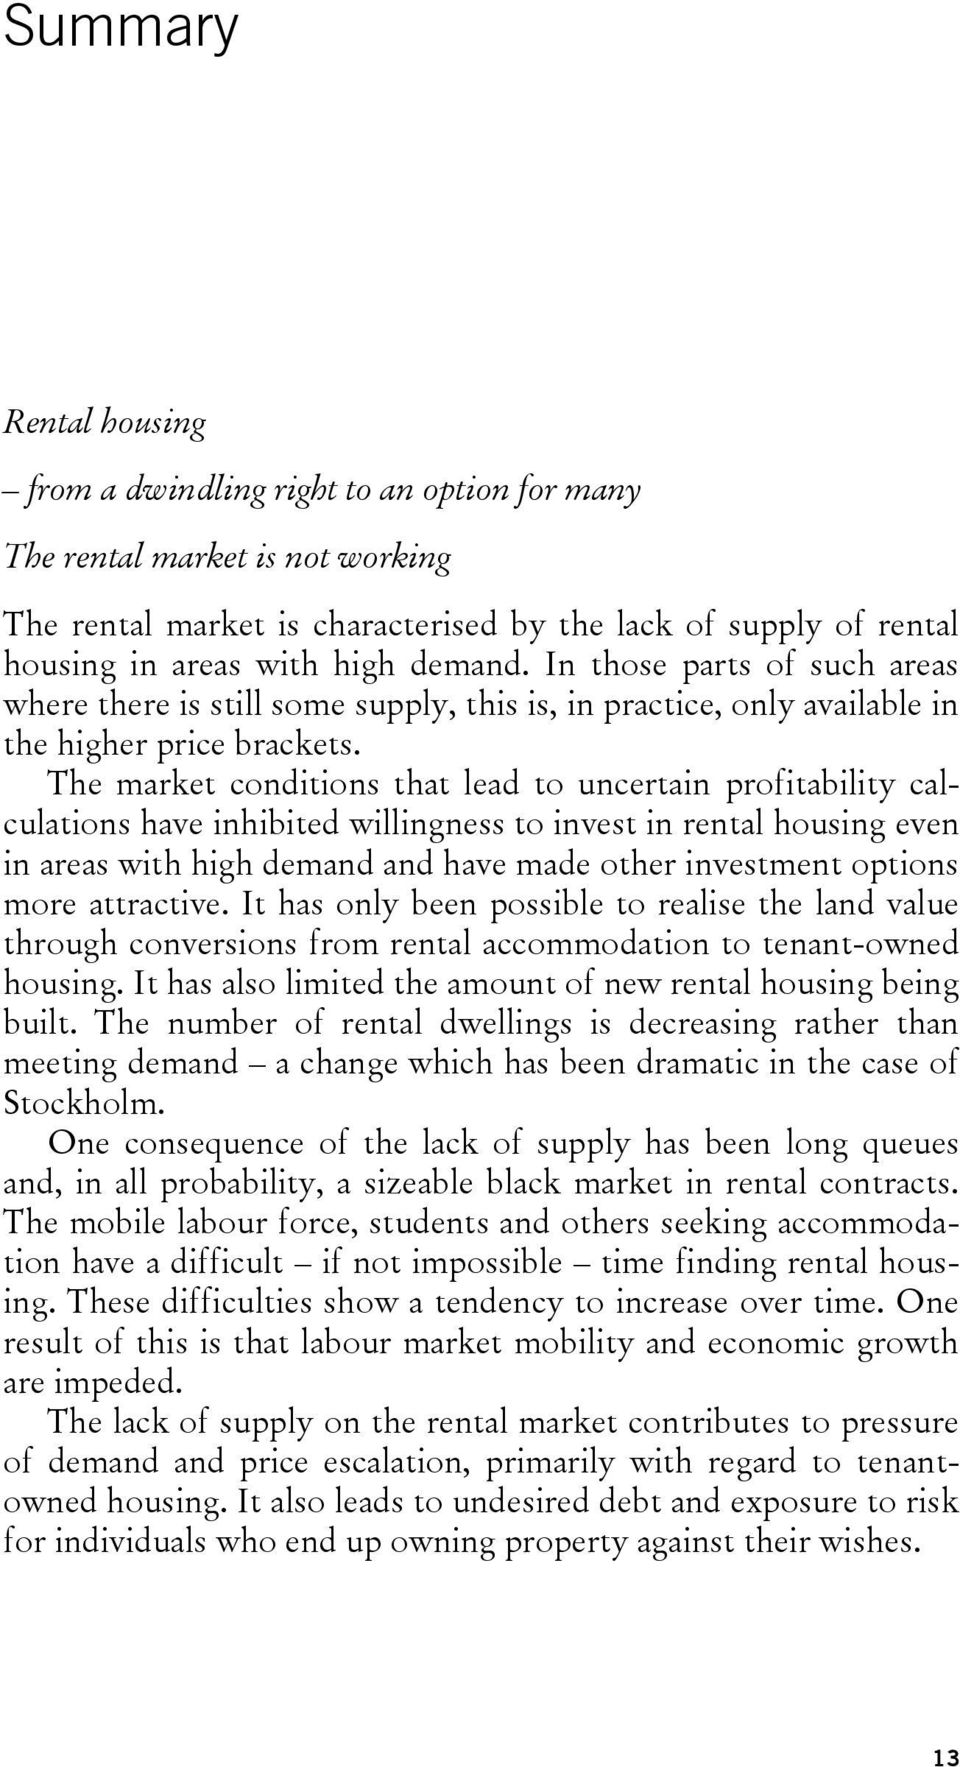 The market conditions that lead to uncertain profitability calculations have inhibited willingness to invest in rental housing even in areas with high demand and have made other investment options